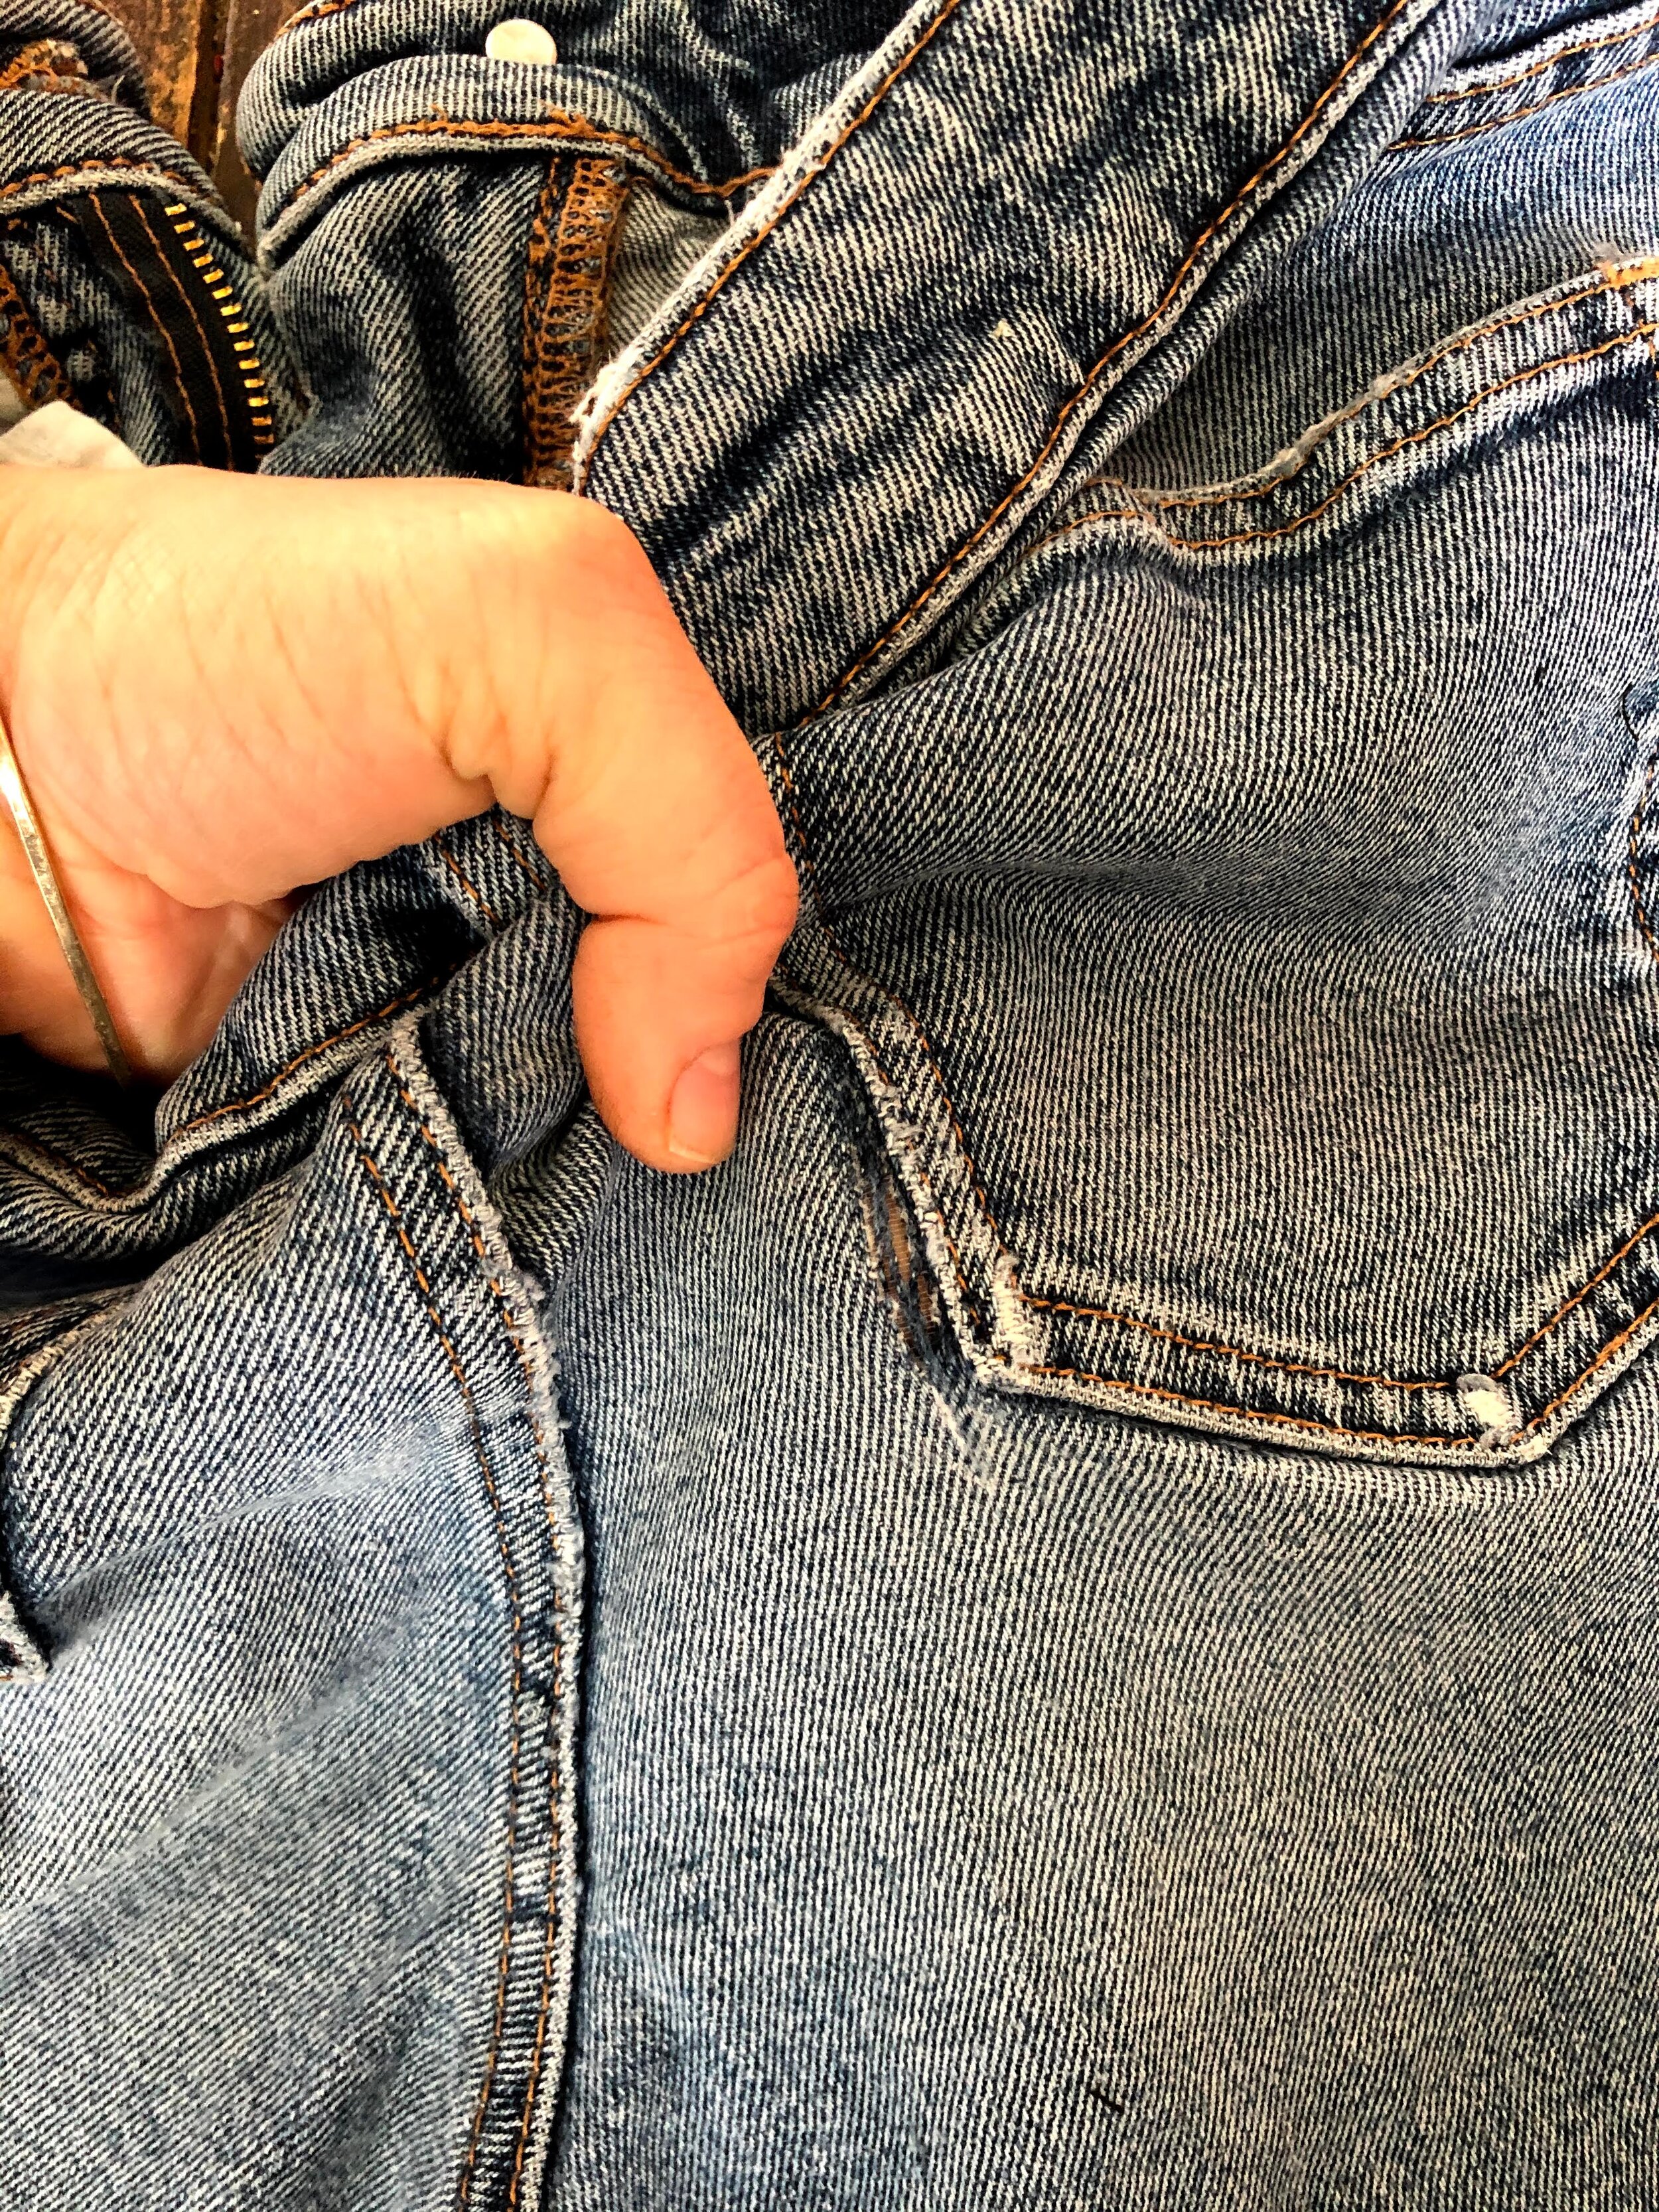 How to repair a ripped jean —